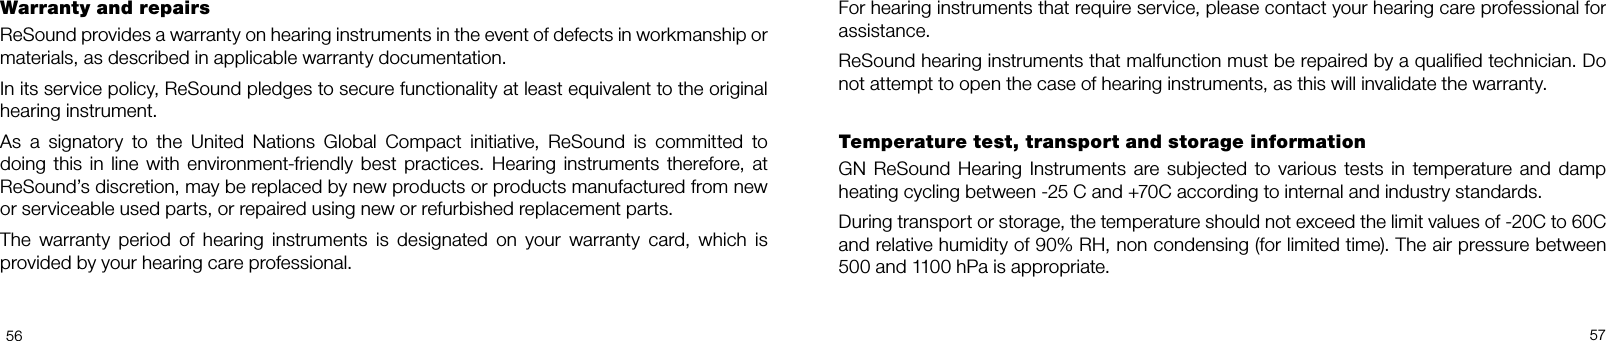 5657For hearing instruments that require service, please contact your hearing care professional for assistance. ReSound hearing instruments that malfunction must be repaired by a qualied technician. Do not attempt to open the case of hearing instruments, as this will invalidate the warranty. Temperature test, transport and storage informationGN  ReSound  Hearing  Instruments  are  subjected  to  various  tests  in  temperature  and  damp heating cycling between 25 C and +70C according to internal and industry standards.During transport or storage, the temperature should not exceed the limit values of 20C to 60C and relative humidity of 90% RH, non condensing (for limited time). The air pressure between 500 and 1100 hPa is appropriate.Warranty and repairs ReSound provides a warranty on hearing instruments in the event of defects in workmanship or materials, as described in applicable warranty documentation. In its service policy, ReSound pledges to secure functionality at least equivalent to the original hearing instrument.  As  a  signatory  to  the  United  Nations  Global  Compact  initiative,  ReSound  is  committed  to  doing this in line with  environment-friendly  best practices. Hearing  instruments  therefore, at ReSound’s discretion, may be replaced by new products or products manufactured from new or serviceable used parts, or repaired using new or refurbished replacement parts. The  warranty  period  of  hearing  instruments  is  designated  on  your  warranty  card,  which  is  provided by your hearing care professional. 